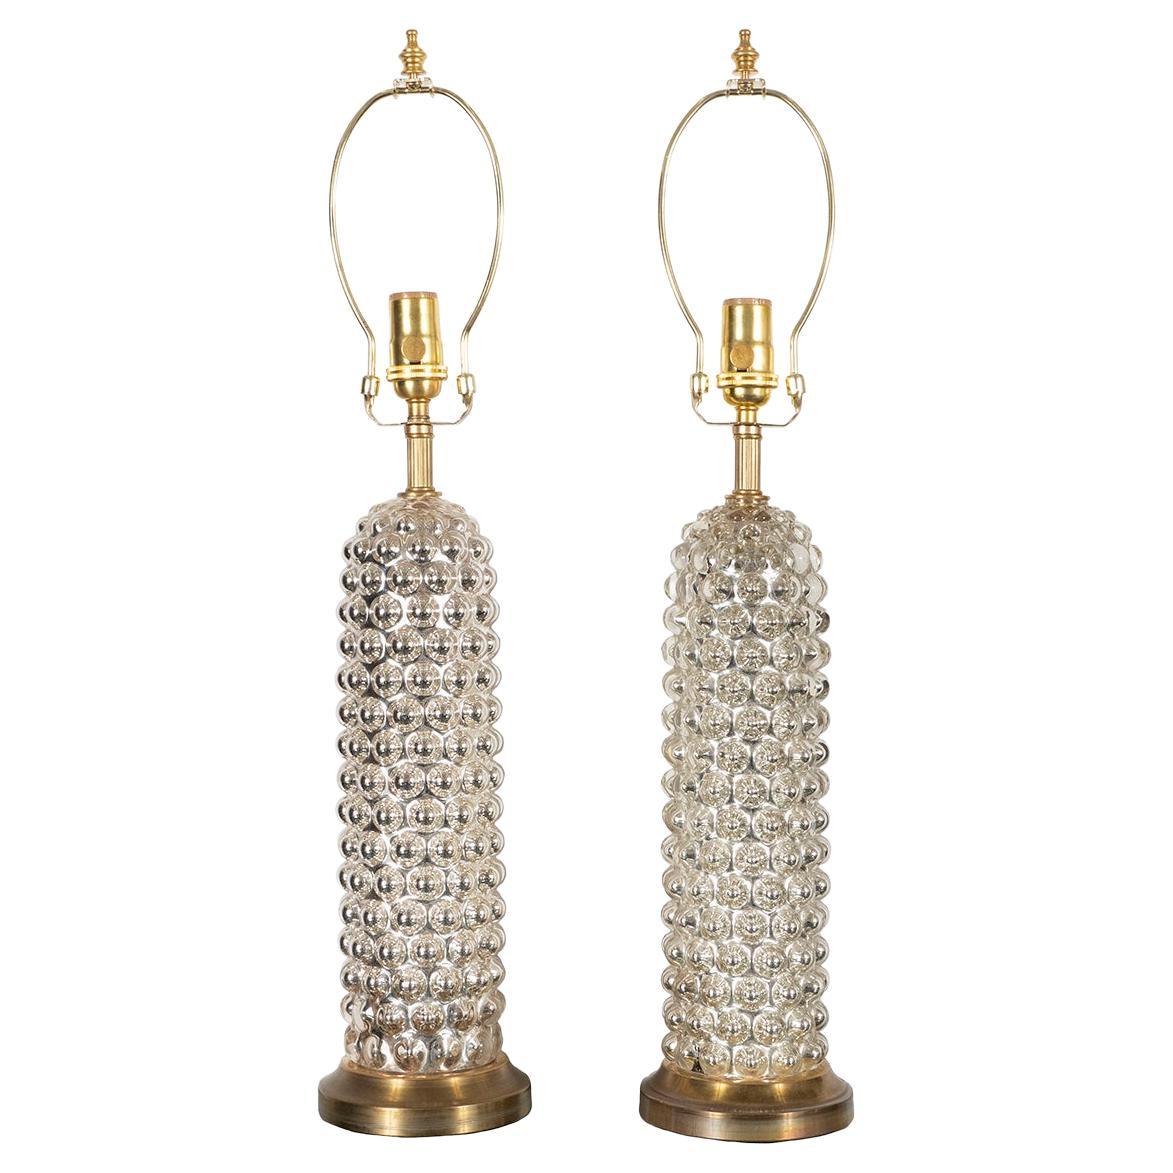 Pair of Mercury Glass Bubble Cylinder Lamps